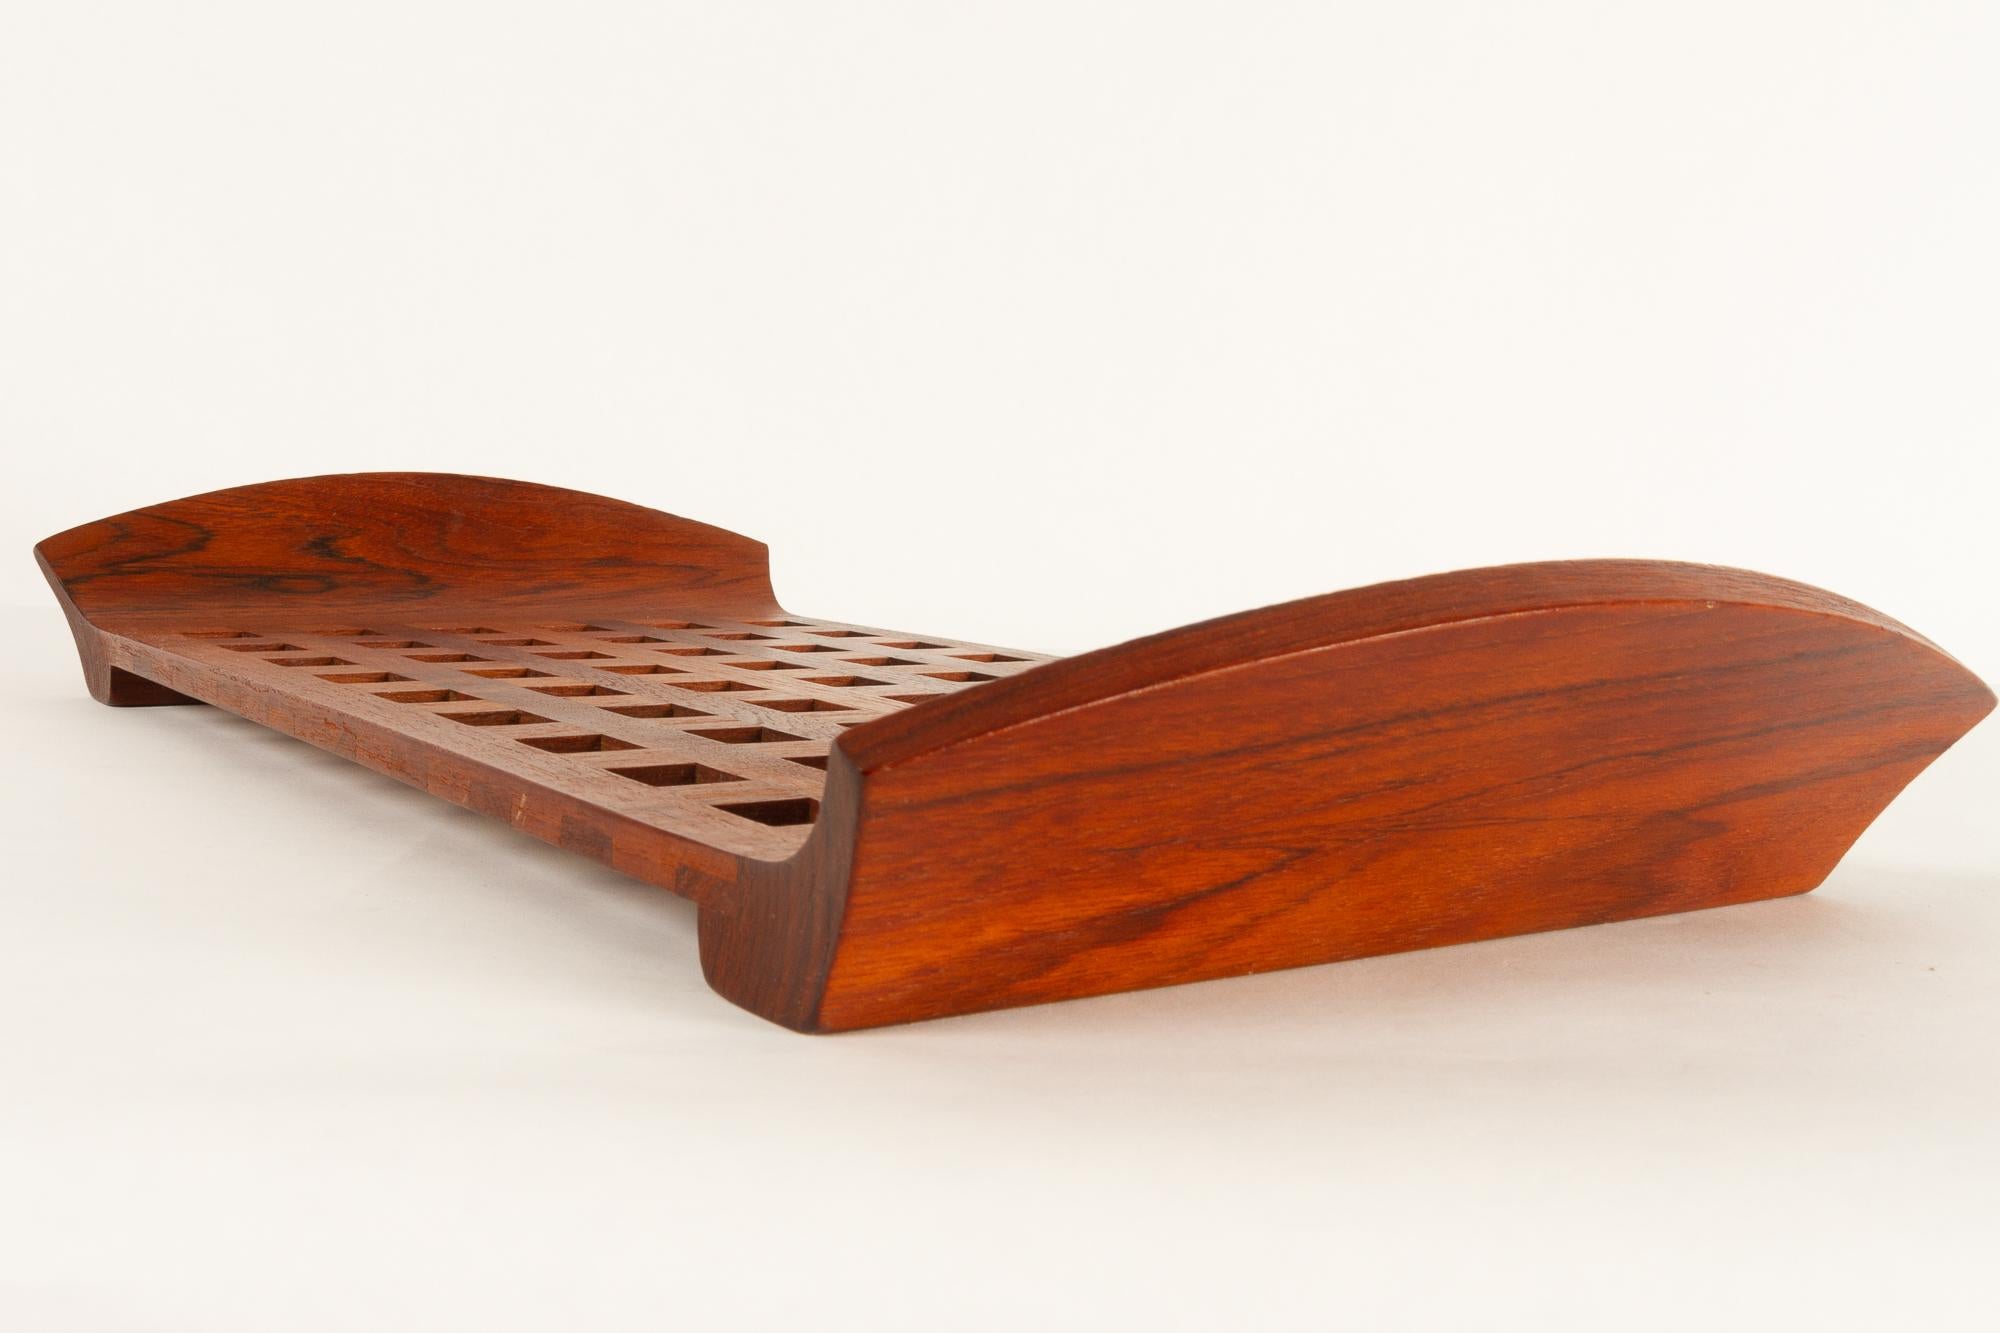 Vintage Danish Teak Tray with Glass Bowls by Jens Harald Quistgaard, 1960s For Sale 5